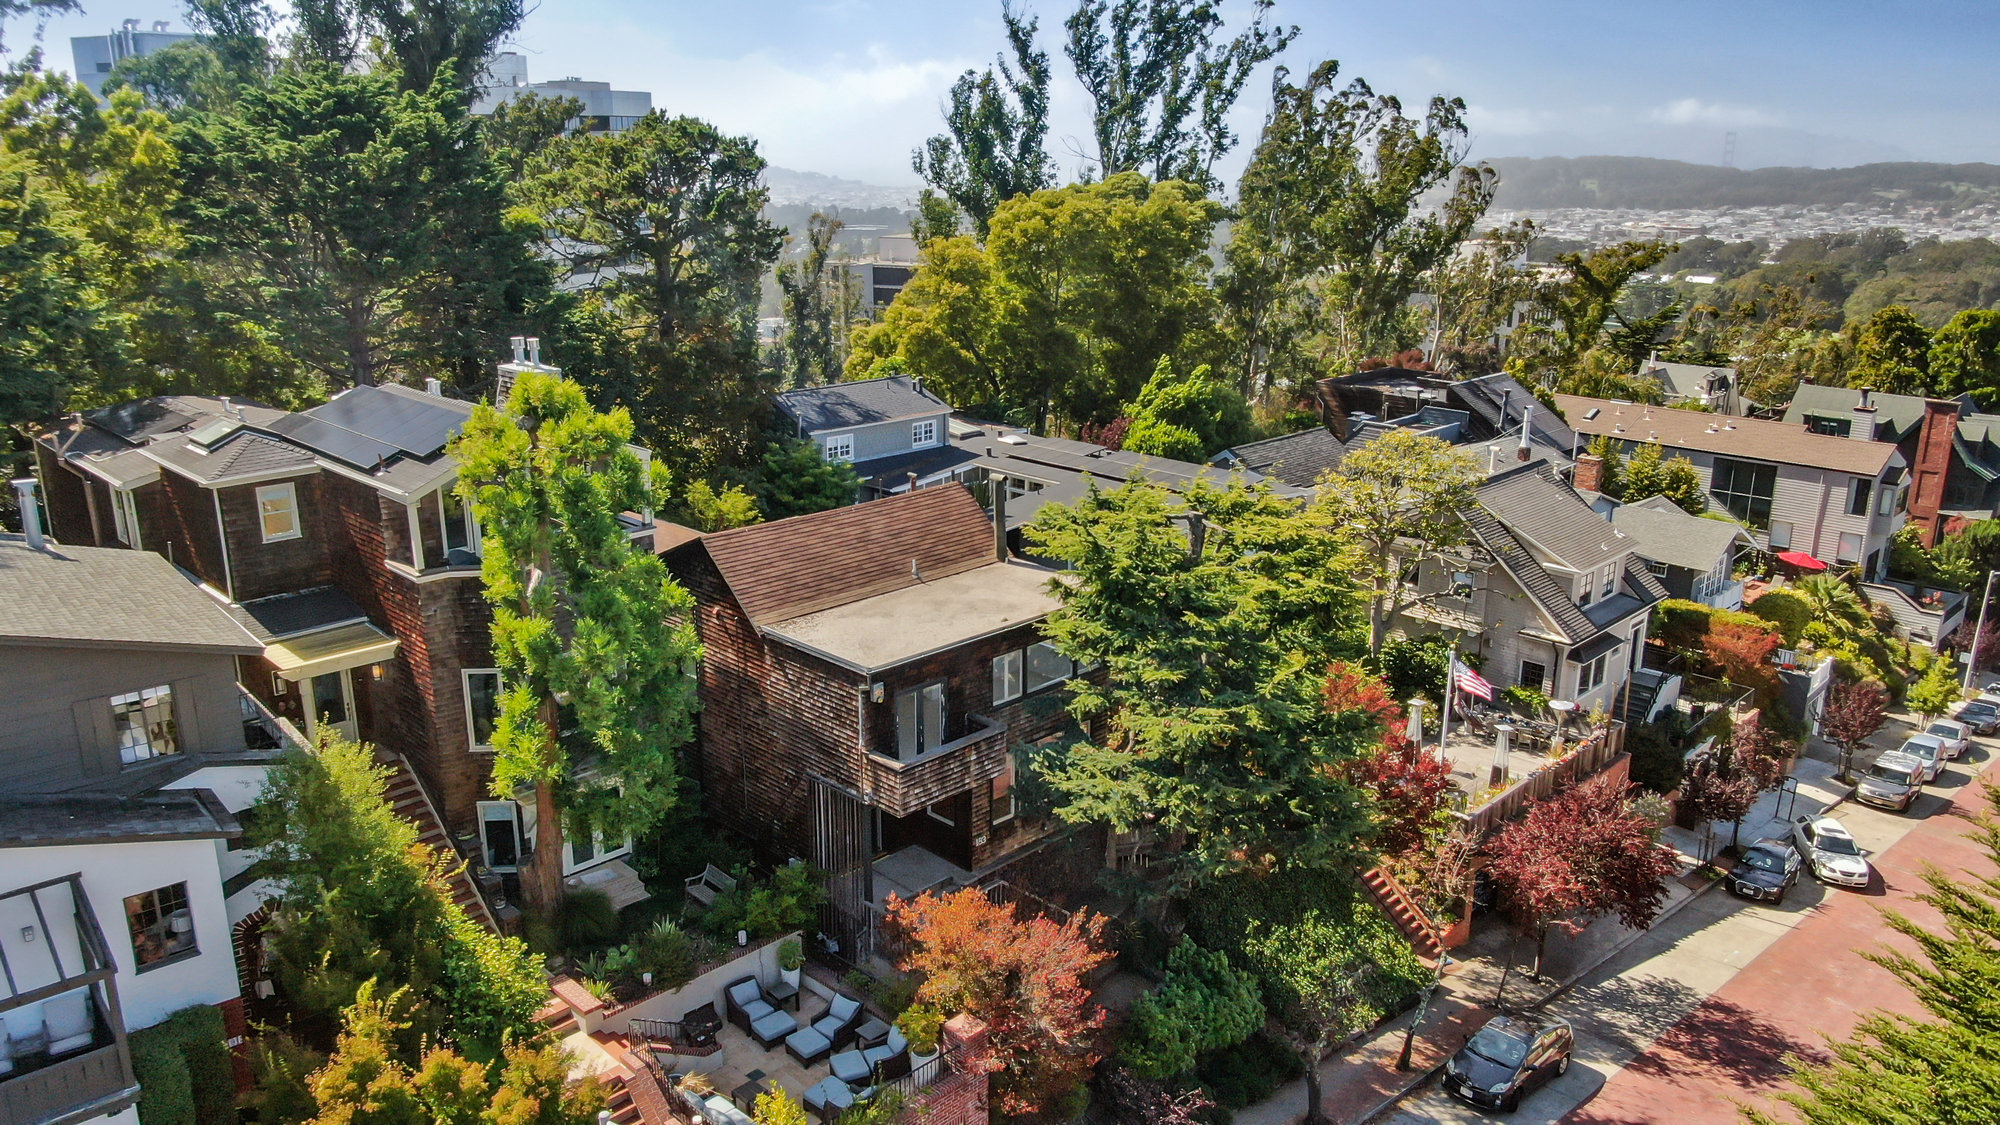 Property Photo: Aerial front view of 183 Edgewood Avenue, showing the home with the city beyond